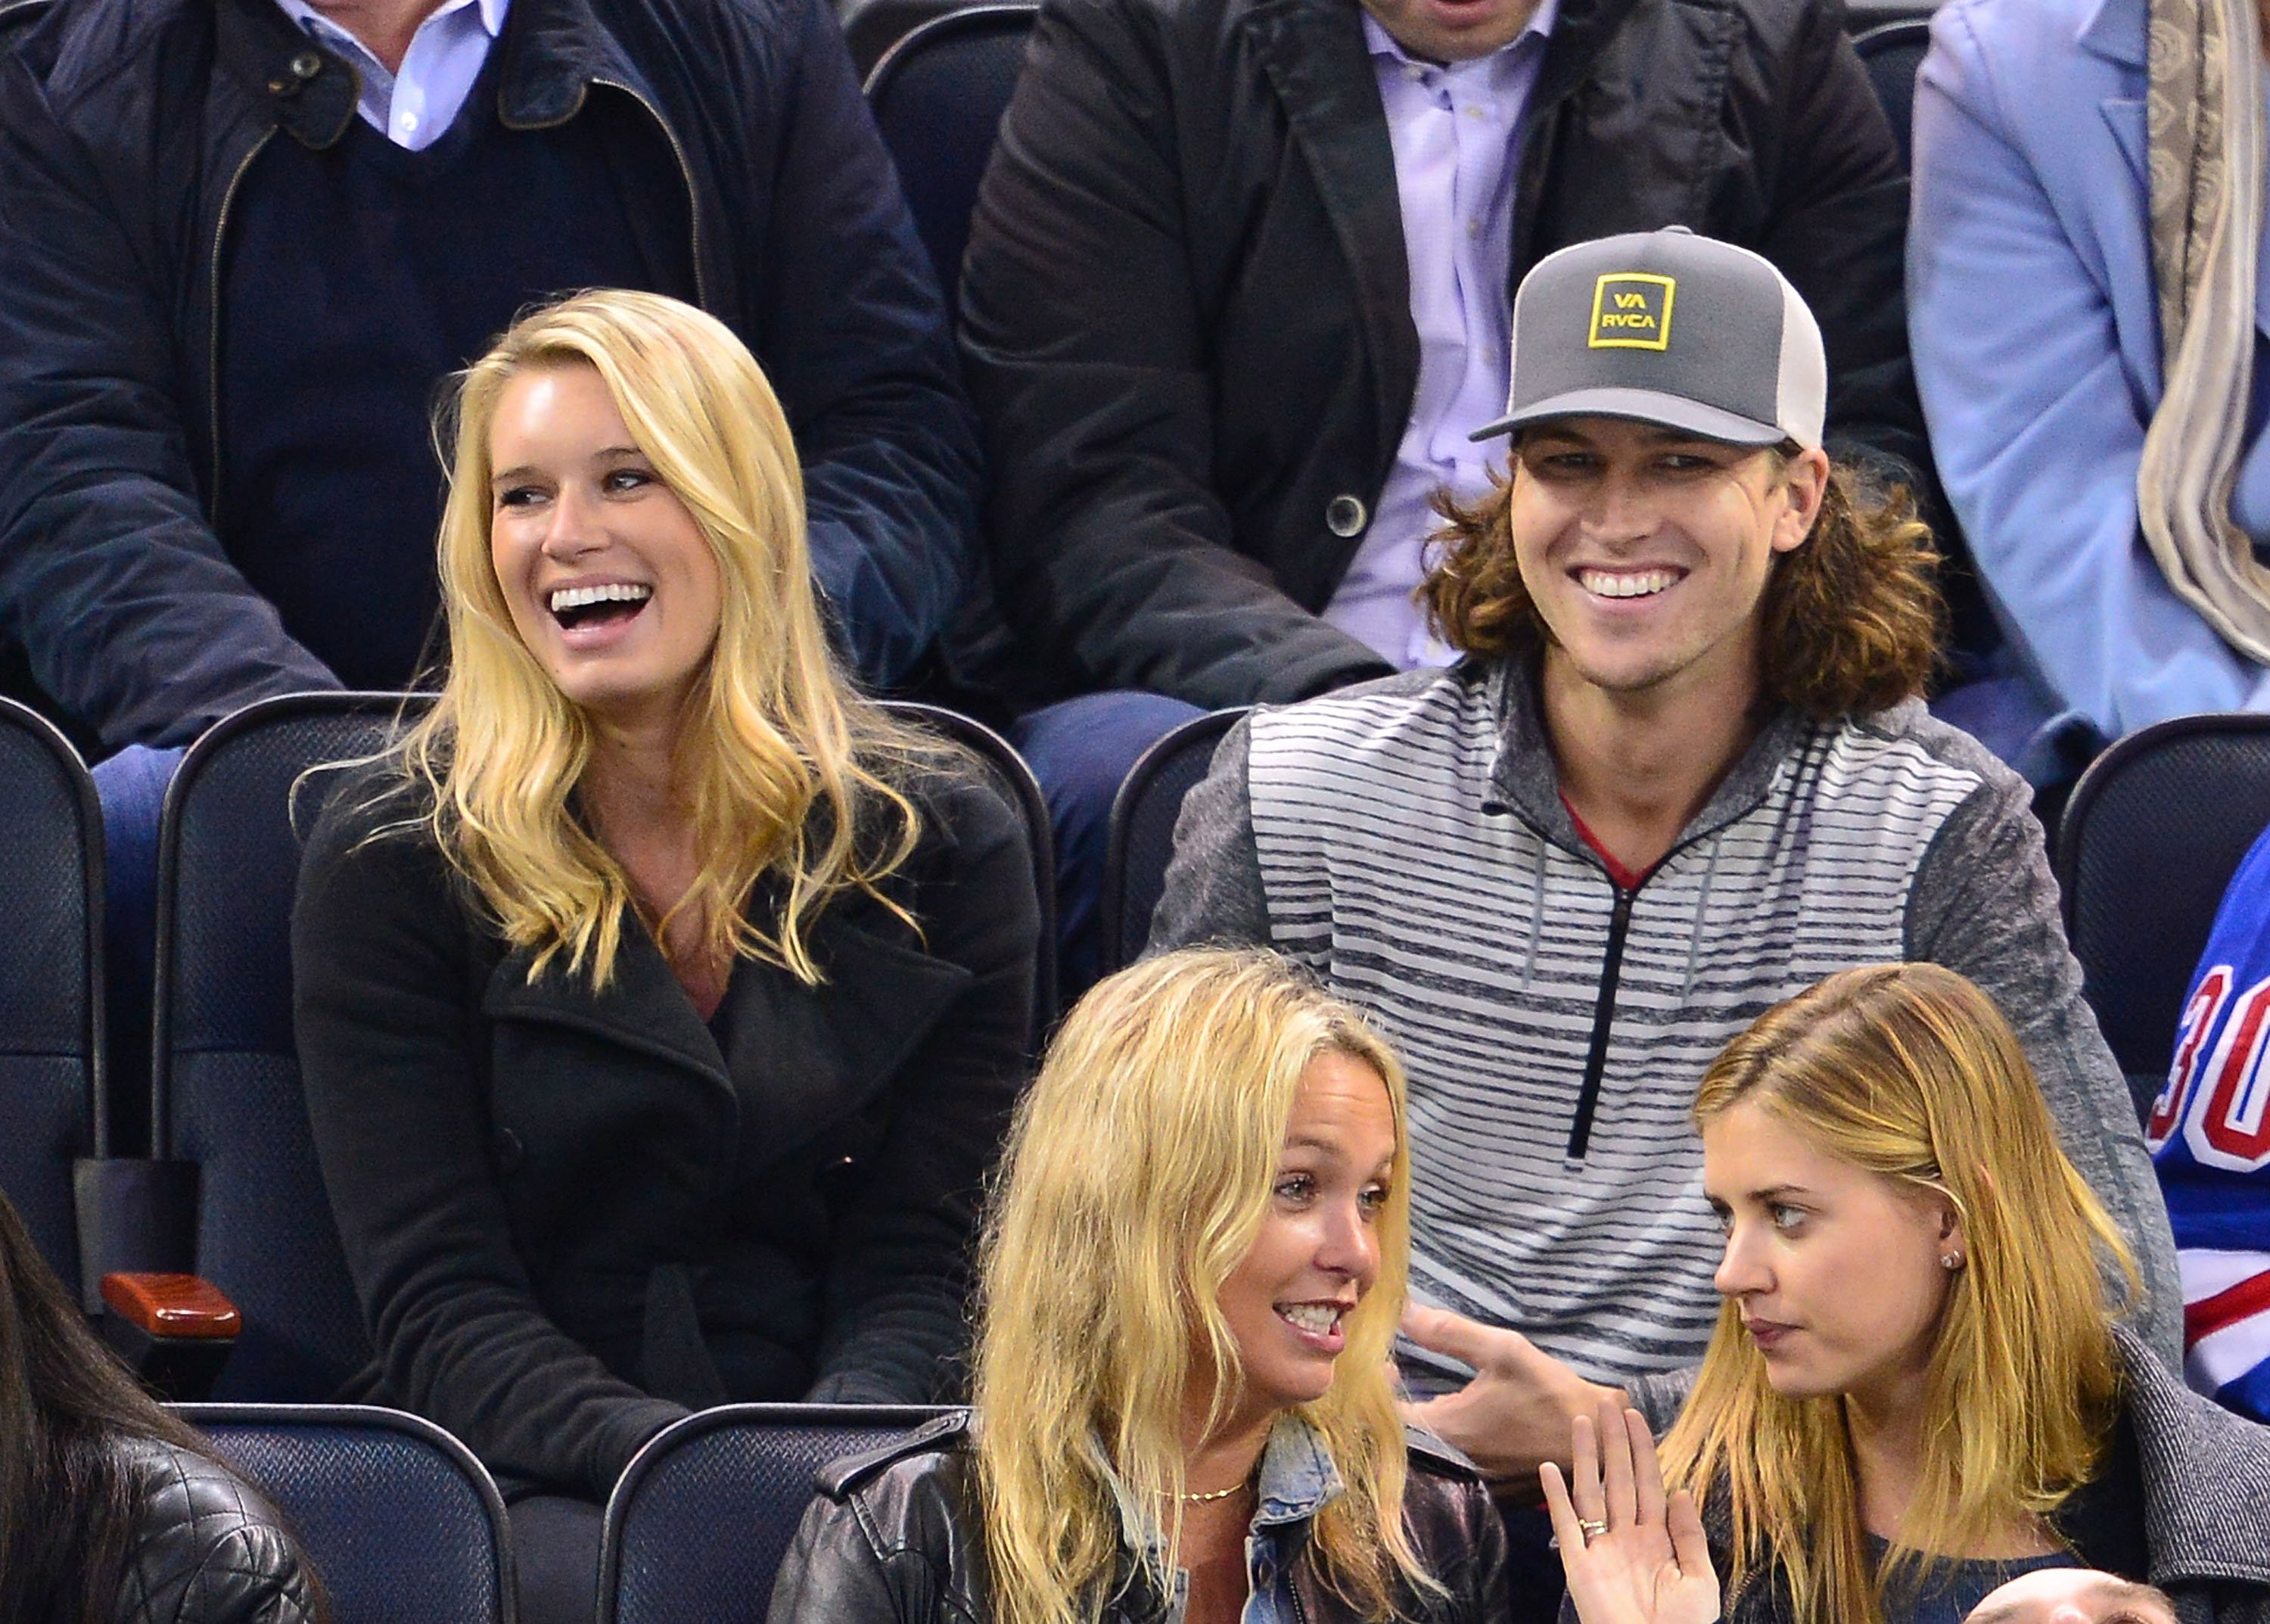 Stacey Harris and Jacob deGrom attend the Pittsburgh Penguins Vs New York Rangers game at Madison Square Garden in New York City on November 11, 2014. | Source: Getty Images